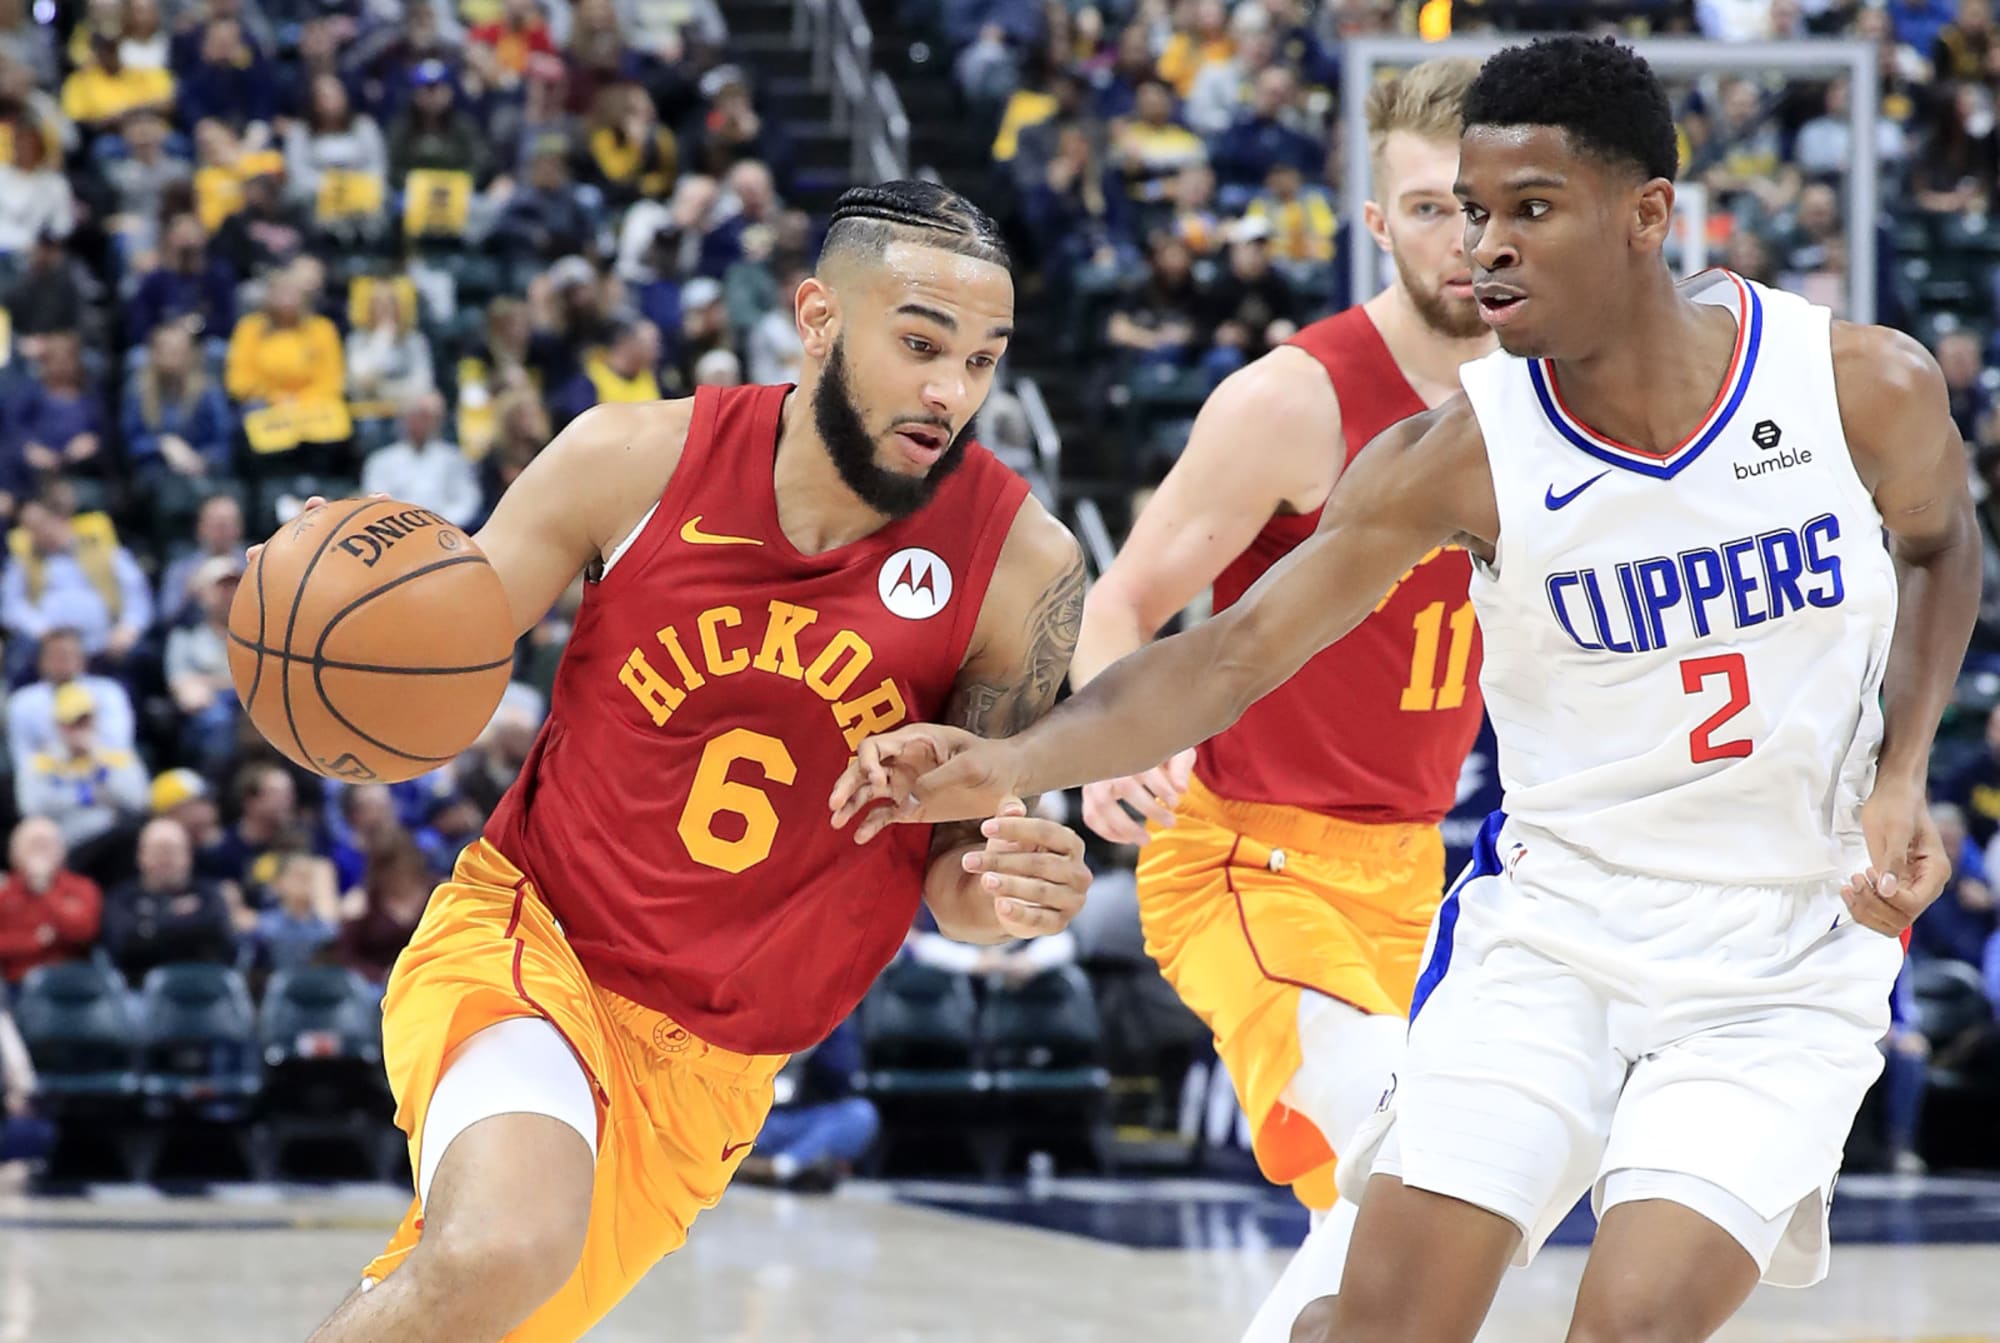 Pacers Players in Their Hickory Uniforms Photo Gallery